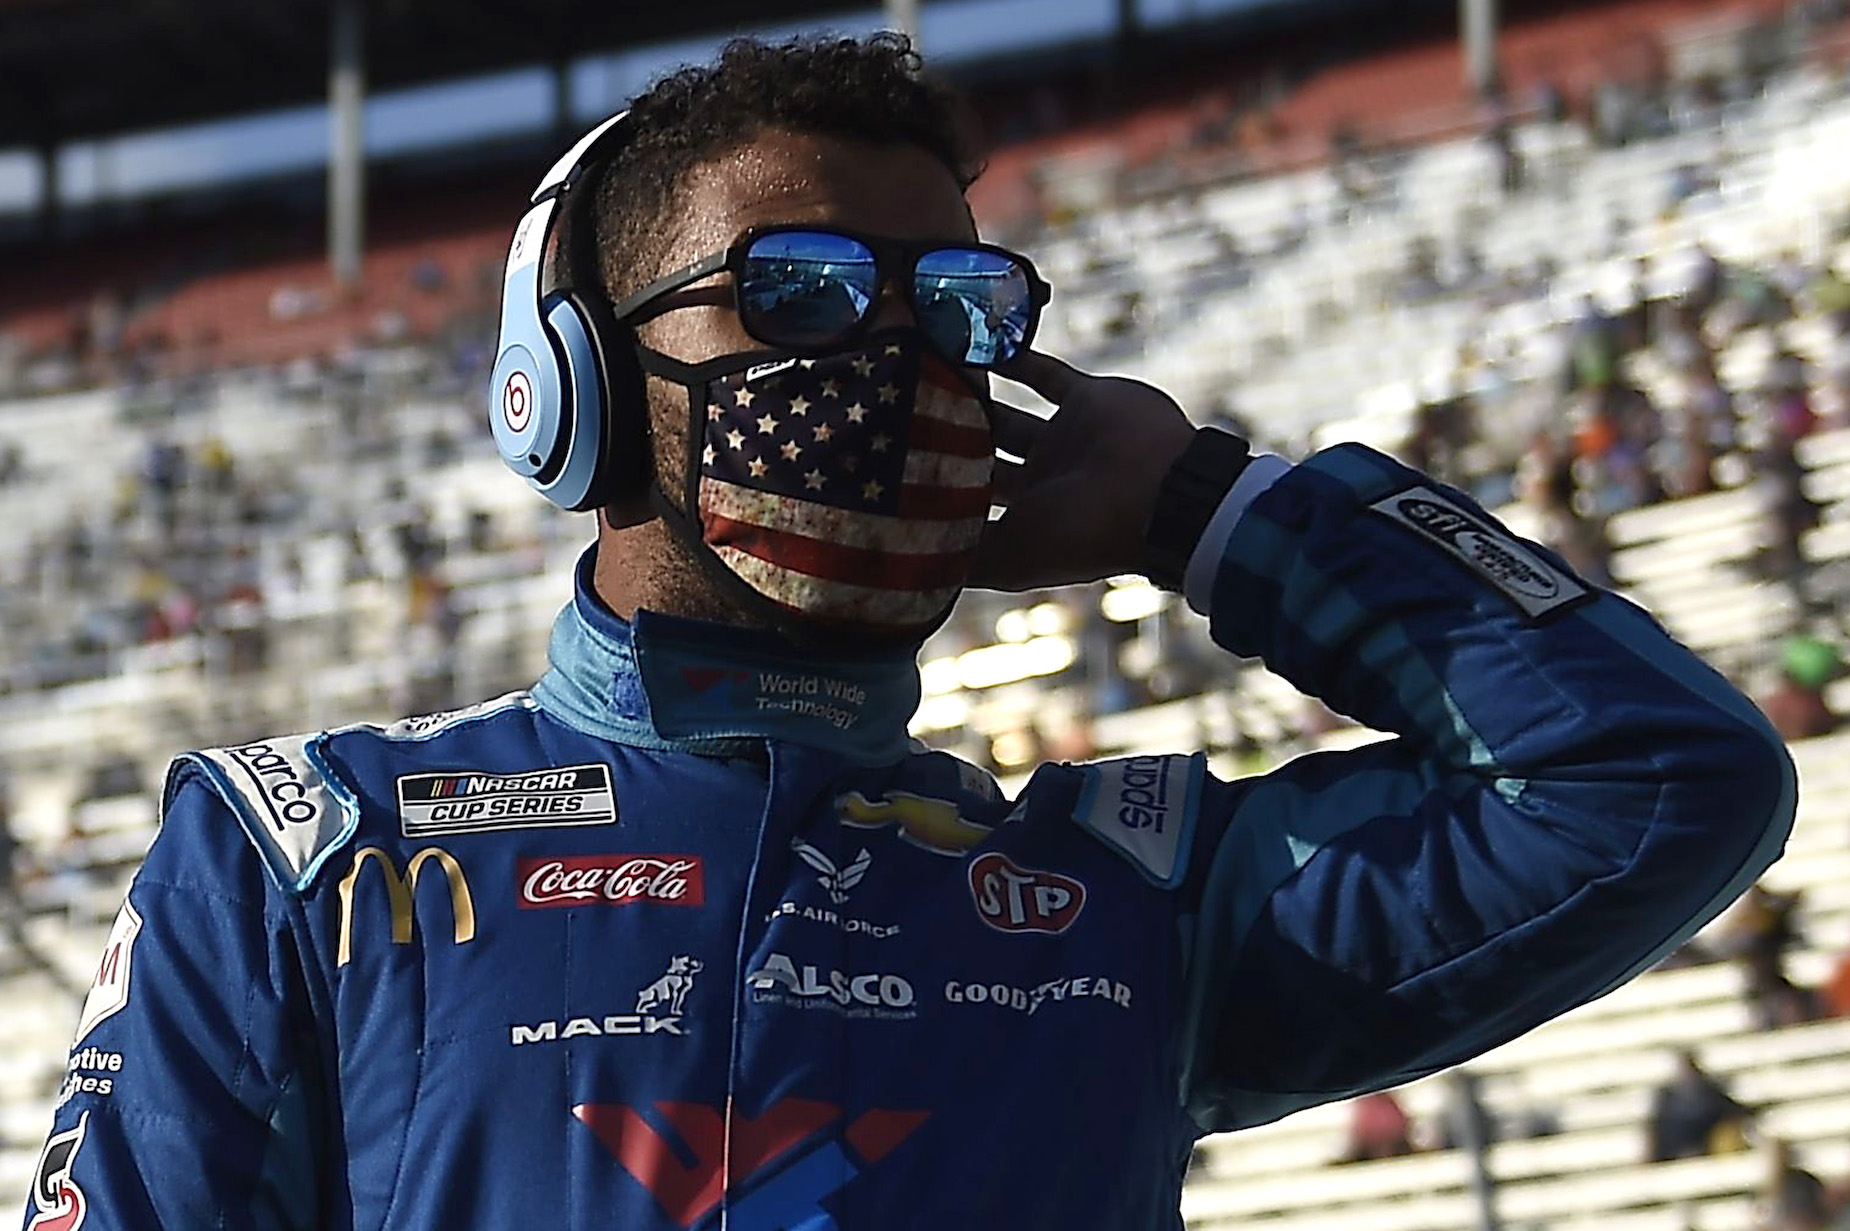 Bubba Wallace almost sent a much different message when he responded to Donald Trump on Twitter.